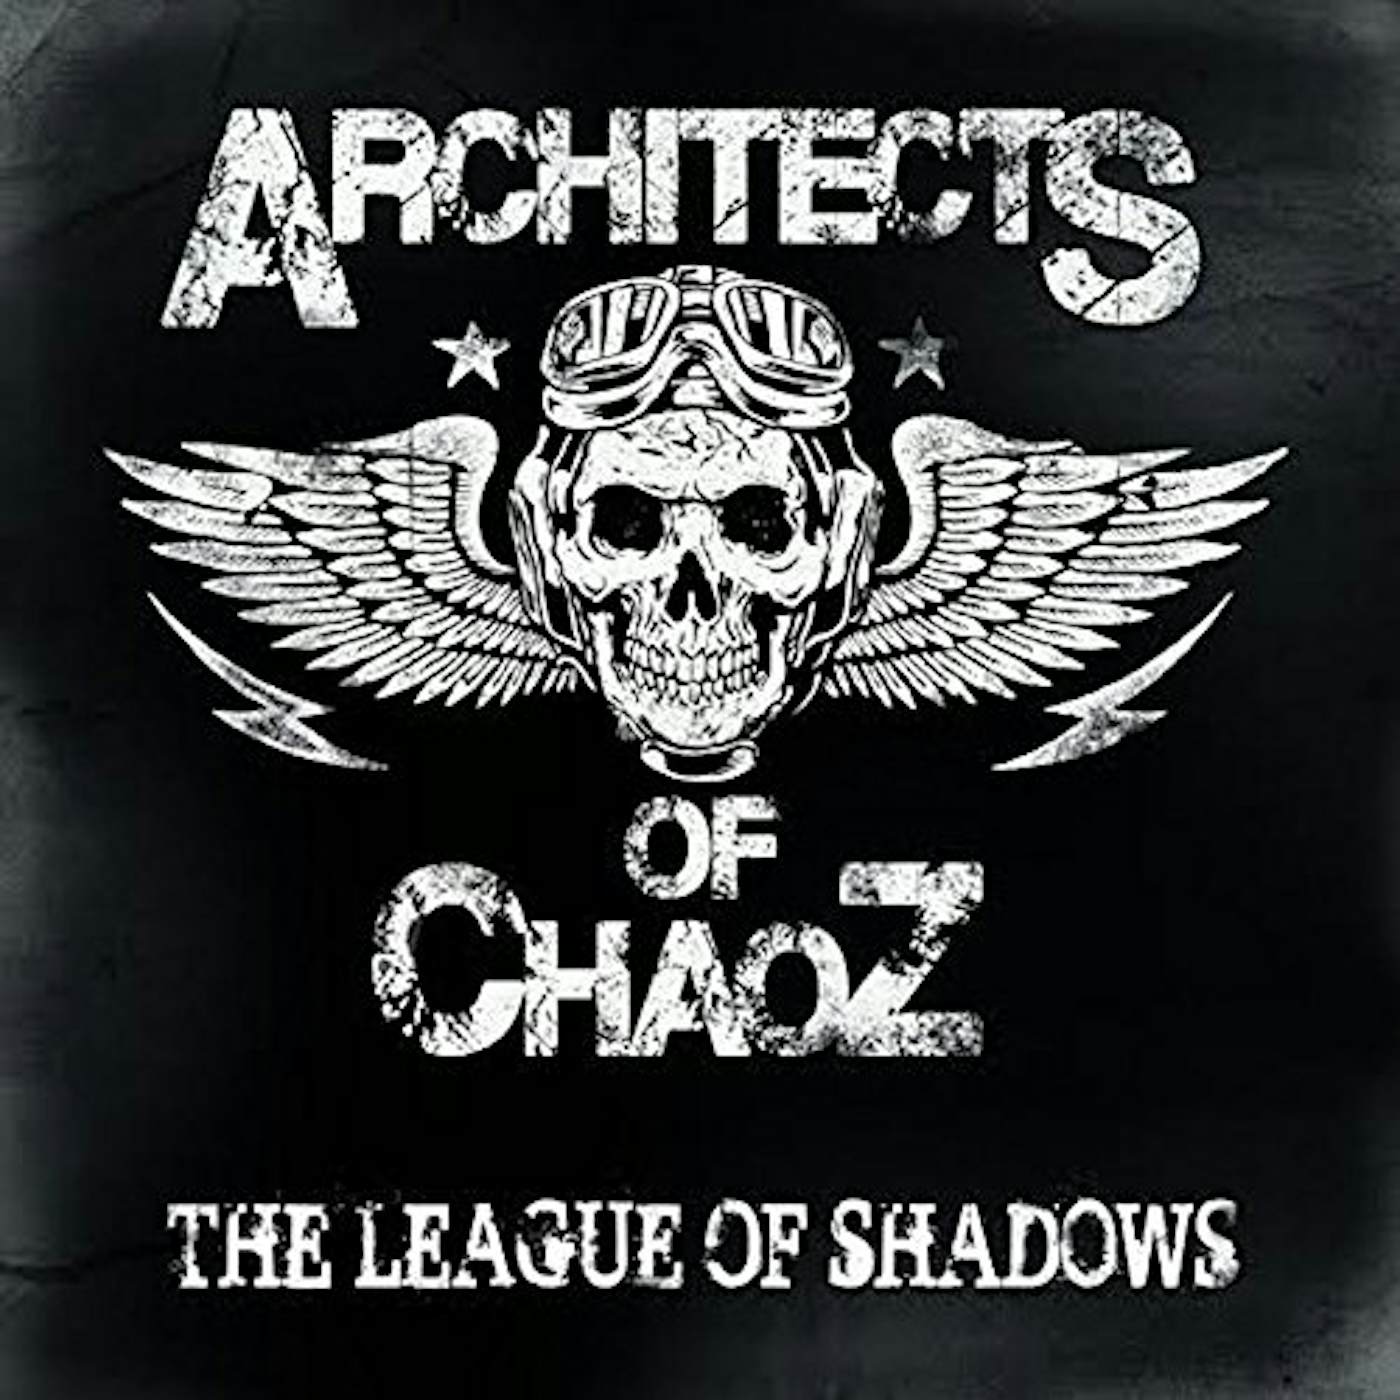 Architects of Chaoz LEAGUE OF SHADOWS Vinyl Record